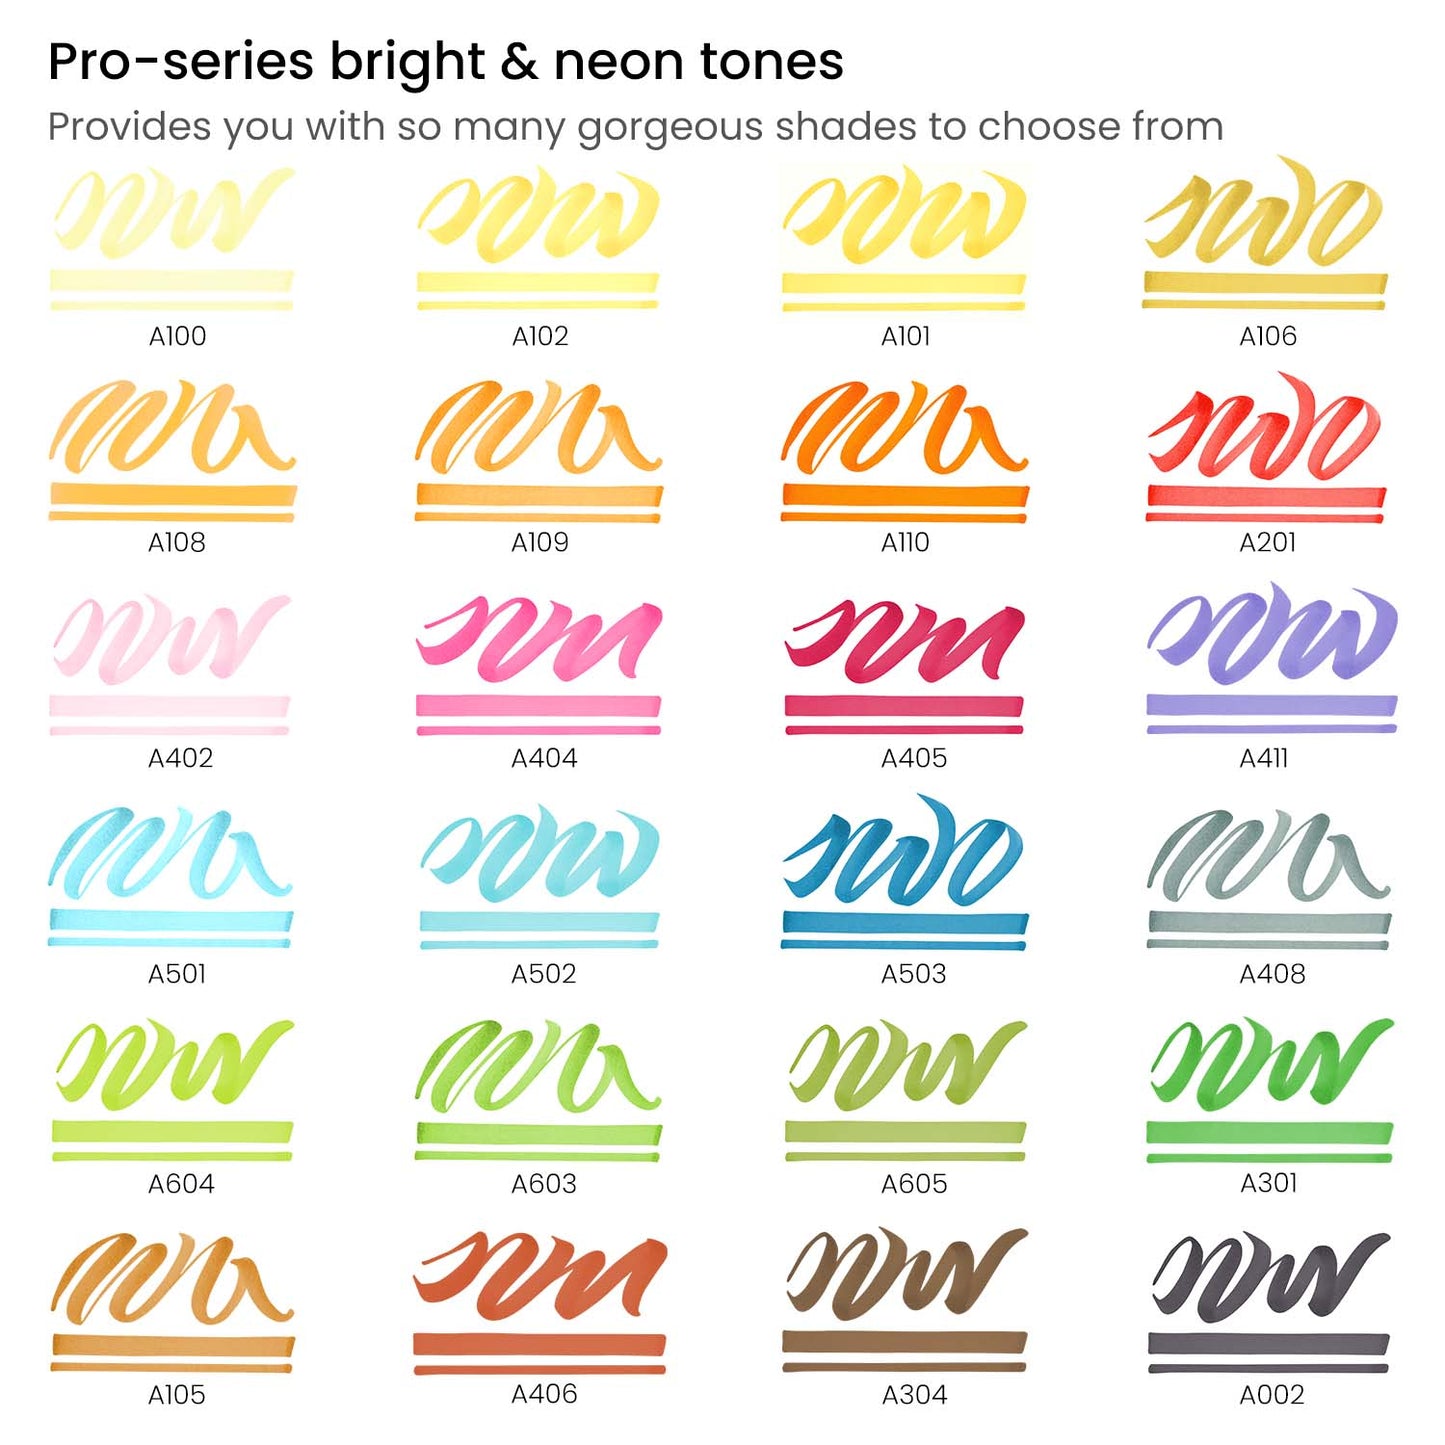 EverBlend™ Ultra H2O Markers, Bright & Neon, Dual-Tip - Set of 24